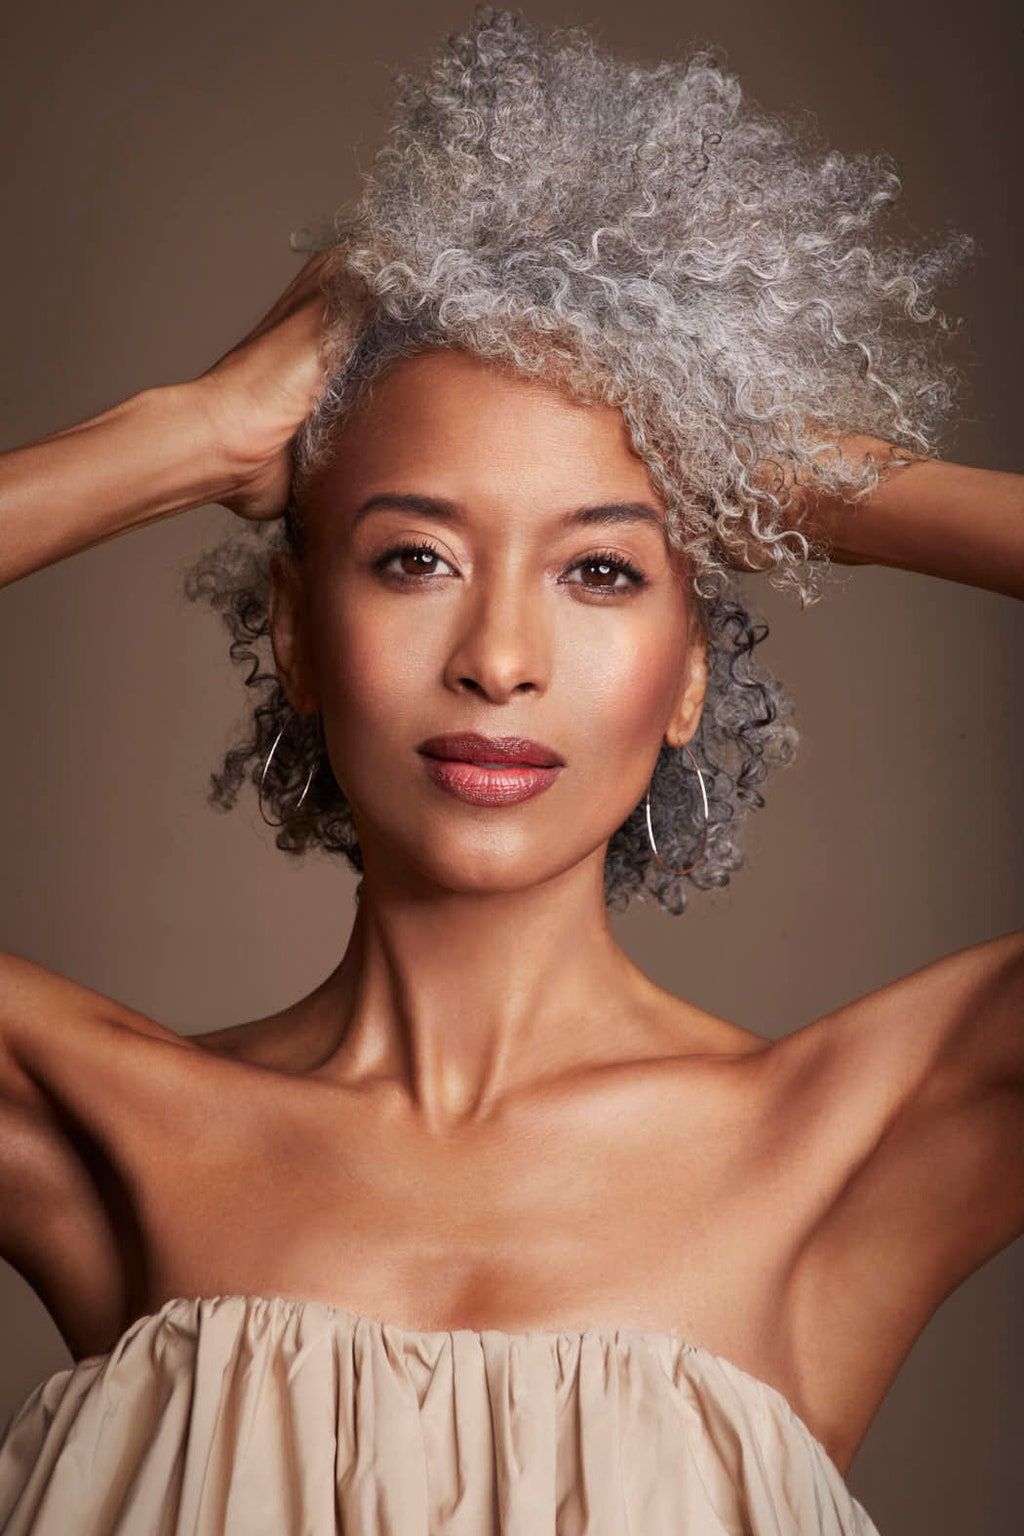 How Model Karen Williams Cares for Her Hair: From Embracing the Gray to Her DIY Scalp Treatment